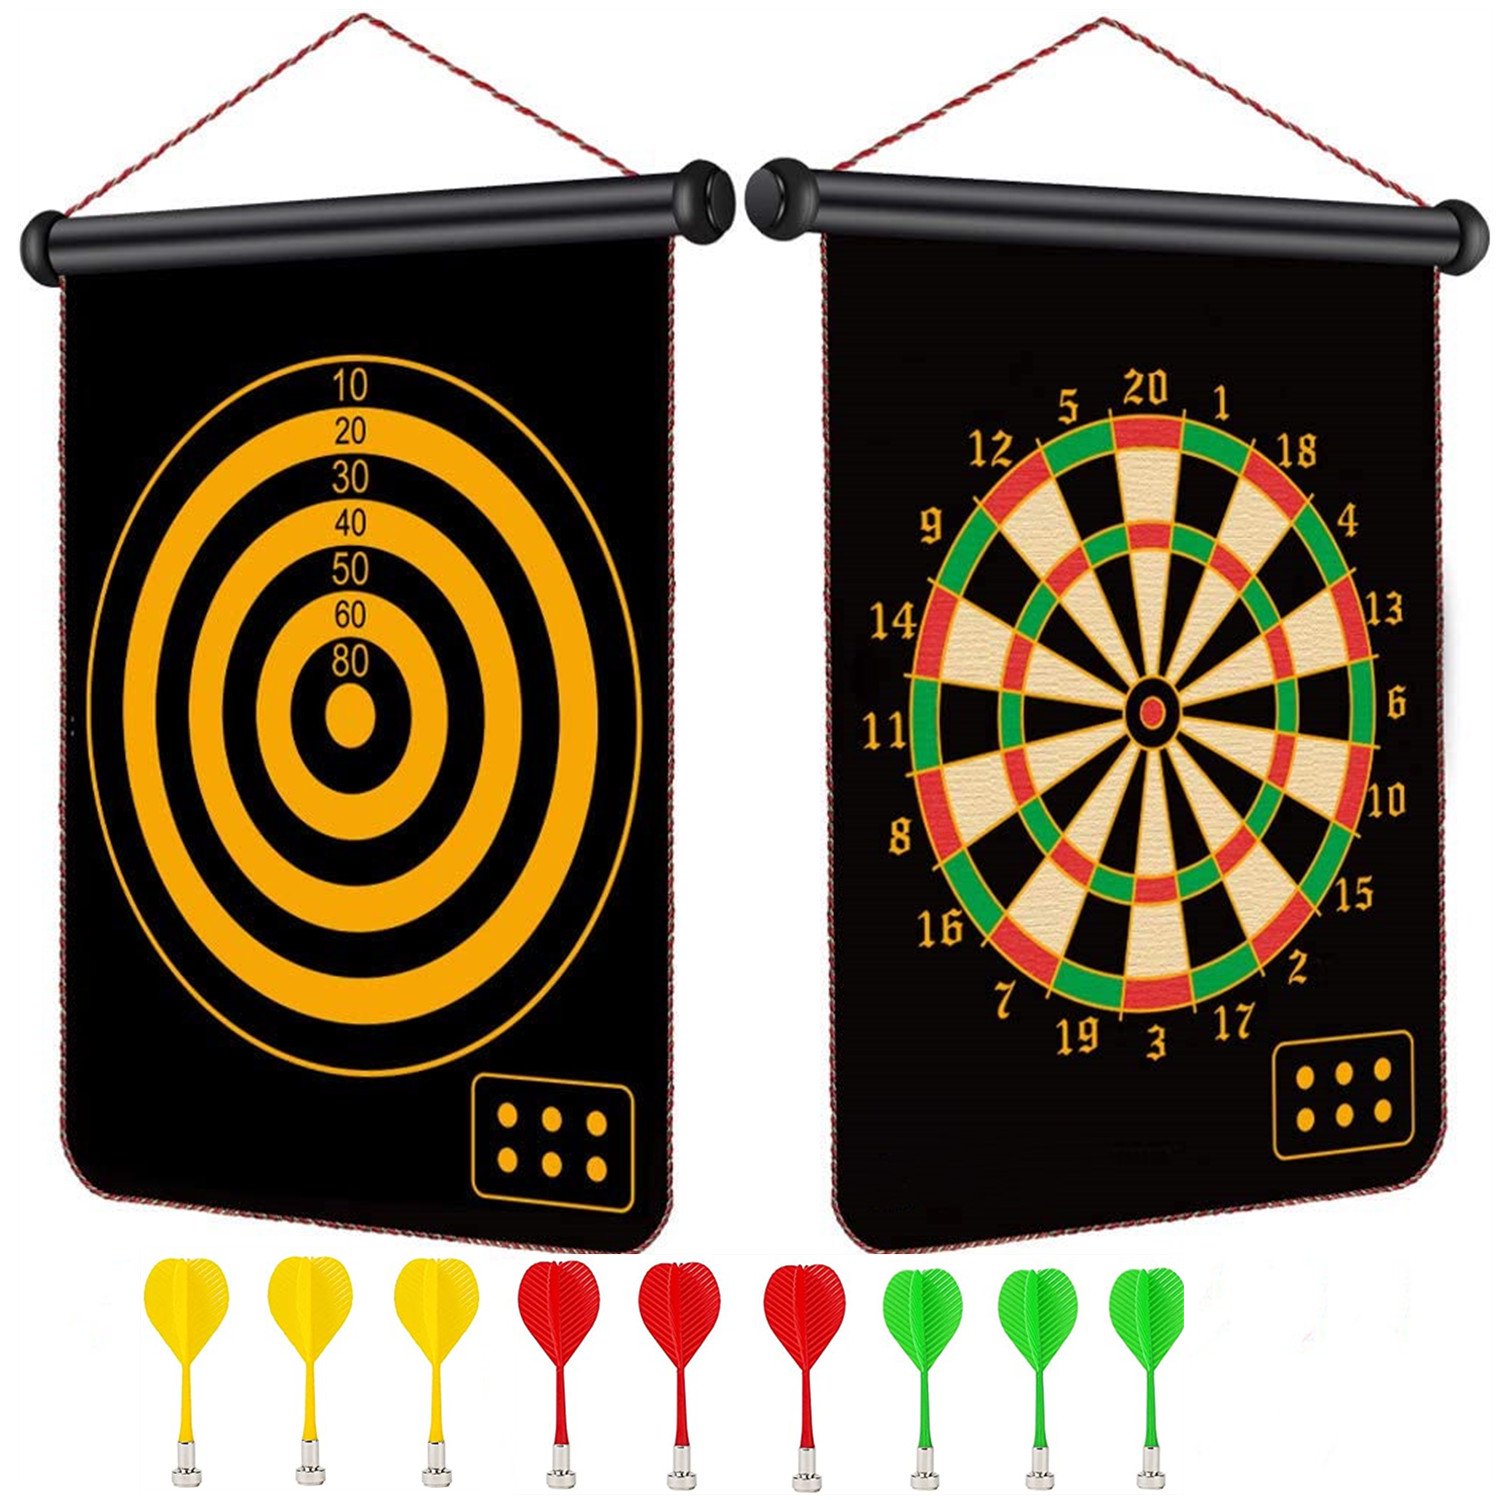 "Magnetic Dart Board, Happiwiz Safe Party Games Indoor Outdoor, Cool Toy Gifts for 5 6 7 8 9 10 11 12 13 Year Old Boy, Double-Sided, 9pcs Safe Darts, Easily Hangs Anywhere" - image 1 of 7